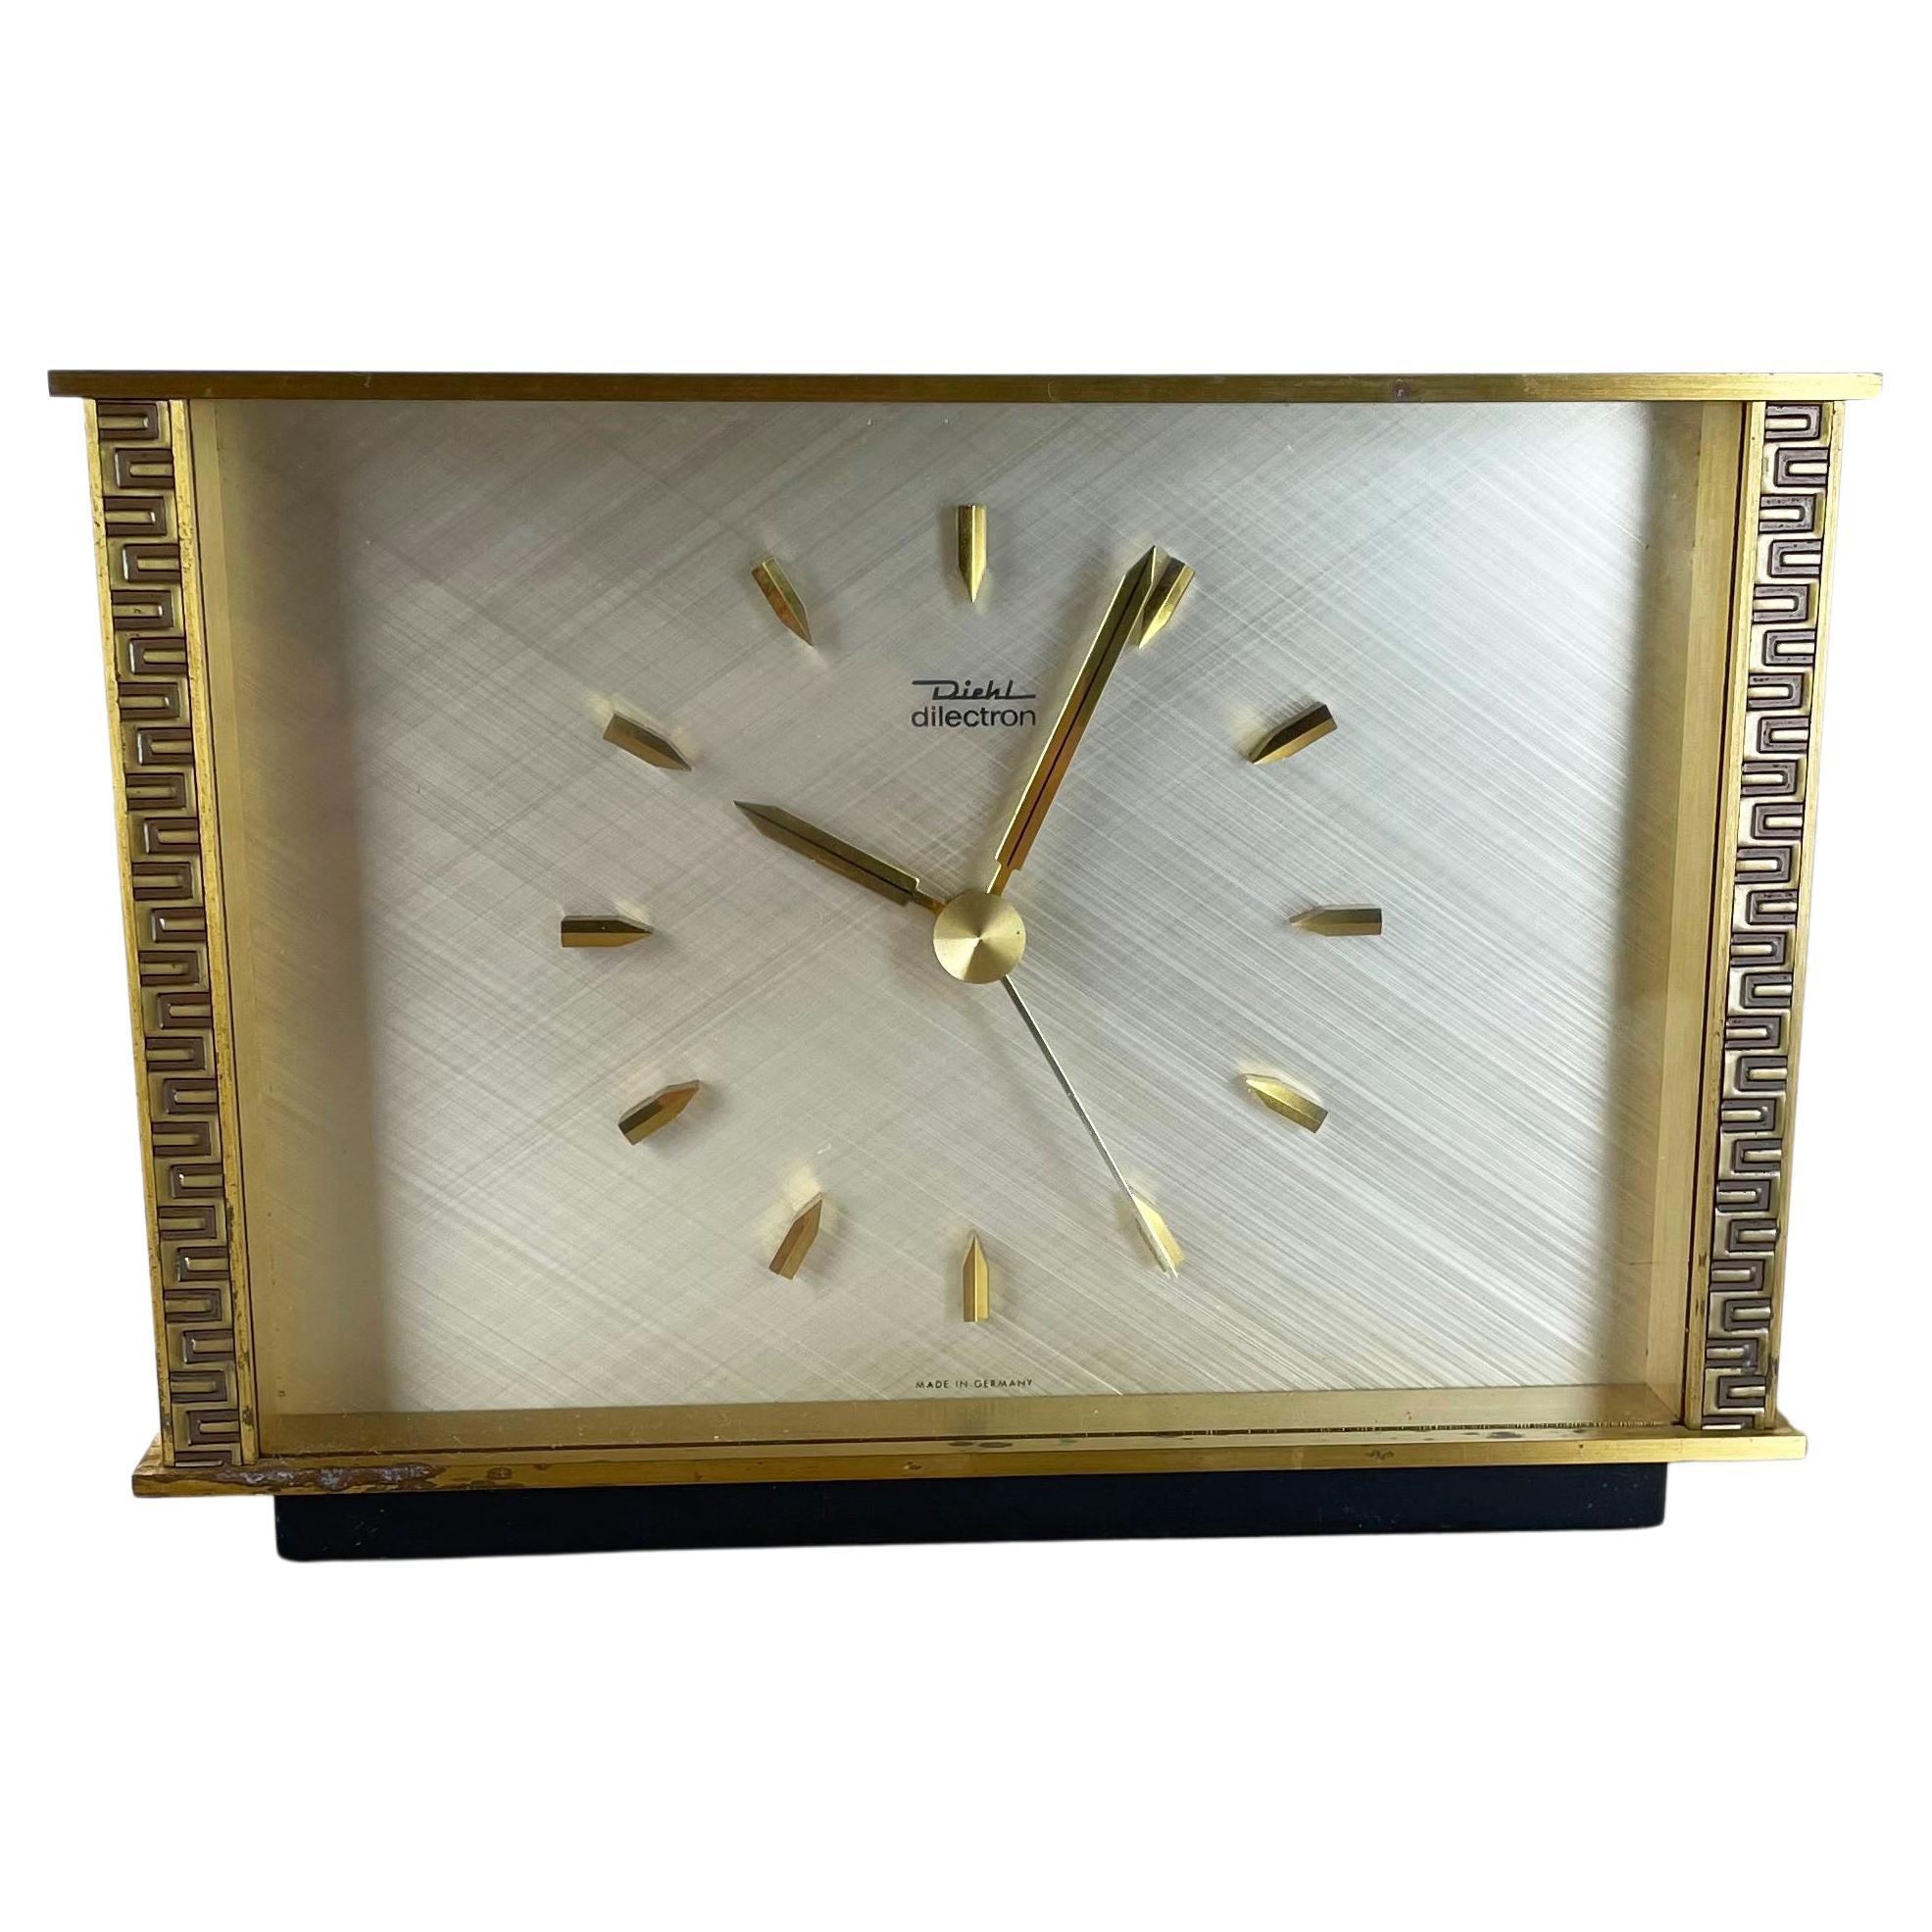 Vintage Modernist Metal Brass Table Clock by Diehl Dilectron, Germany 1960s